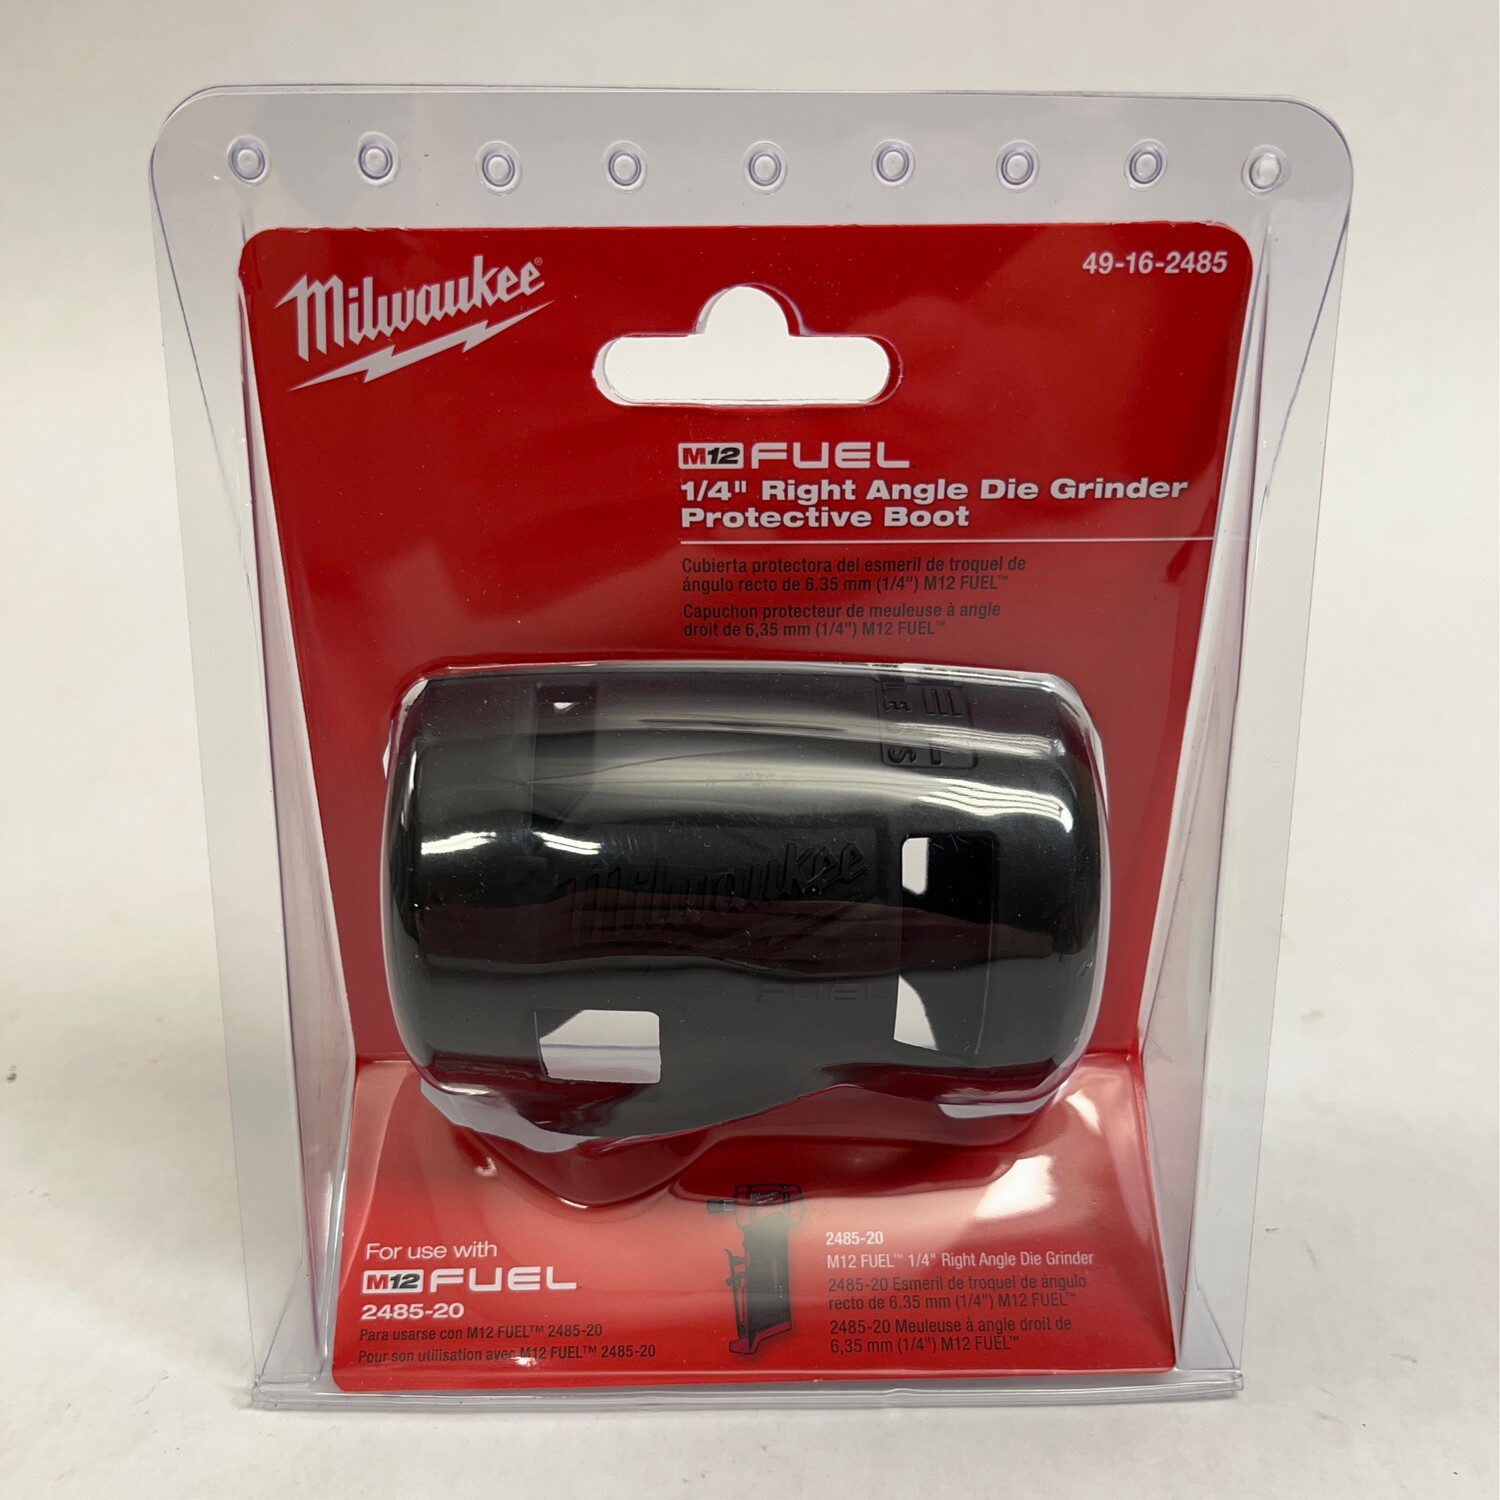 Milwaukee 1/4” Right Angle Die Grinder Protective Boot, 49-16-2485